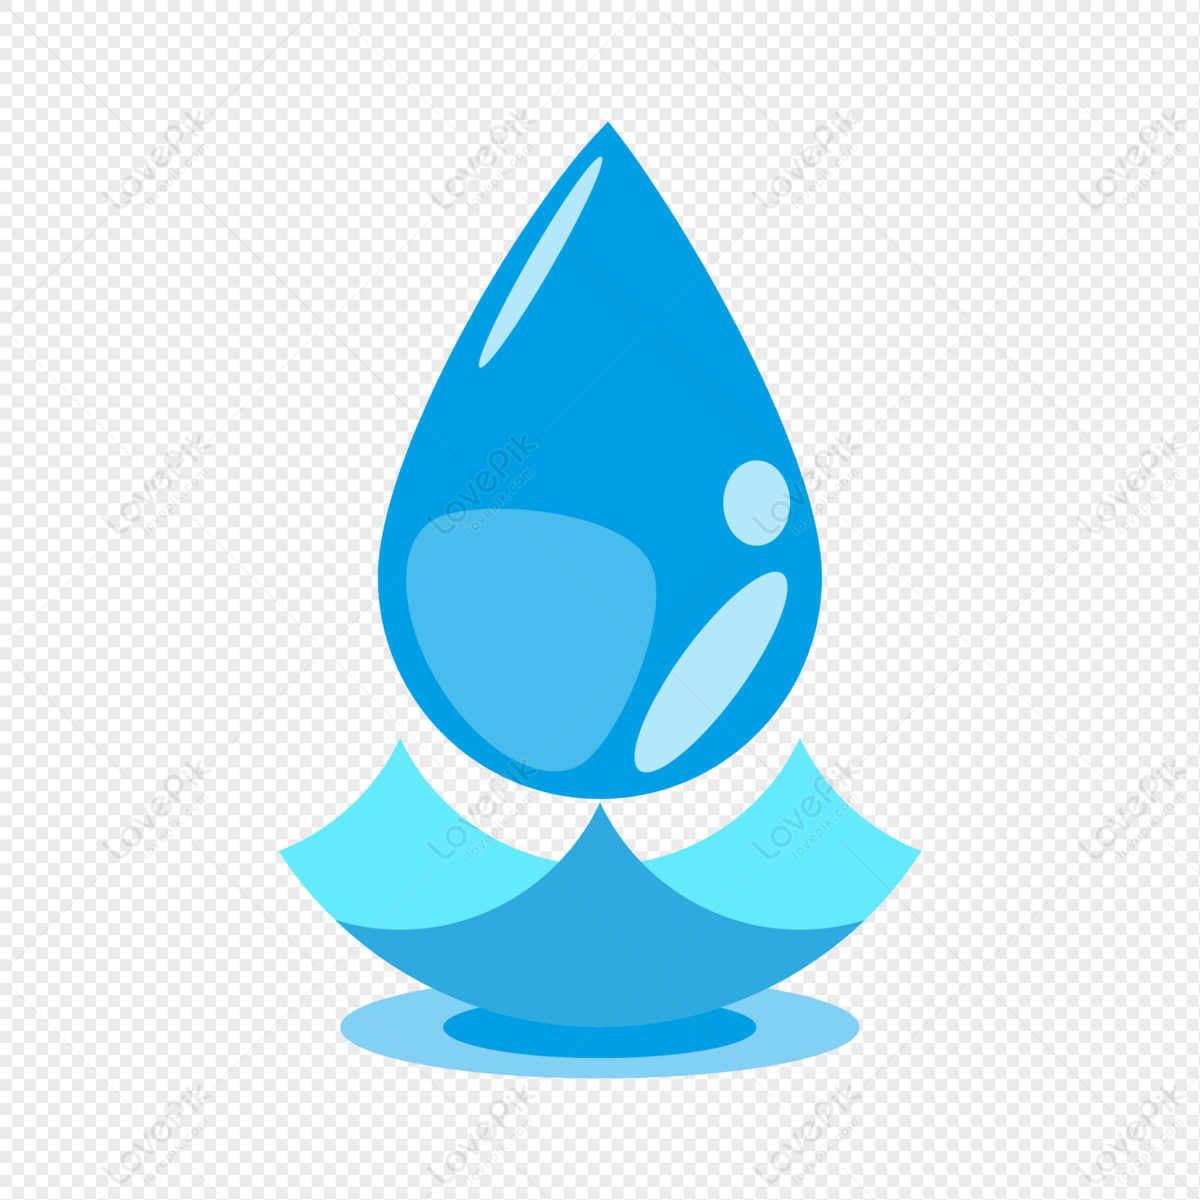 Cartoon Water Drop Splash Material Patterns PNG Image Free Download And  Clipart Image For Free Download - Lovepik | 401098191